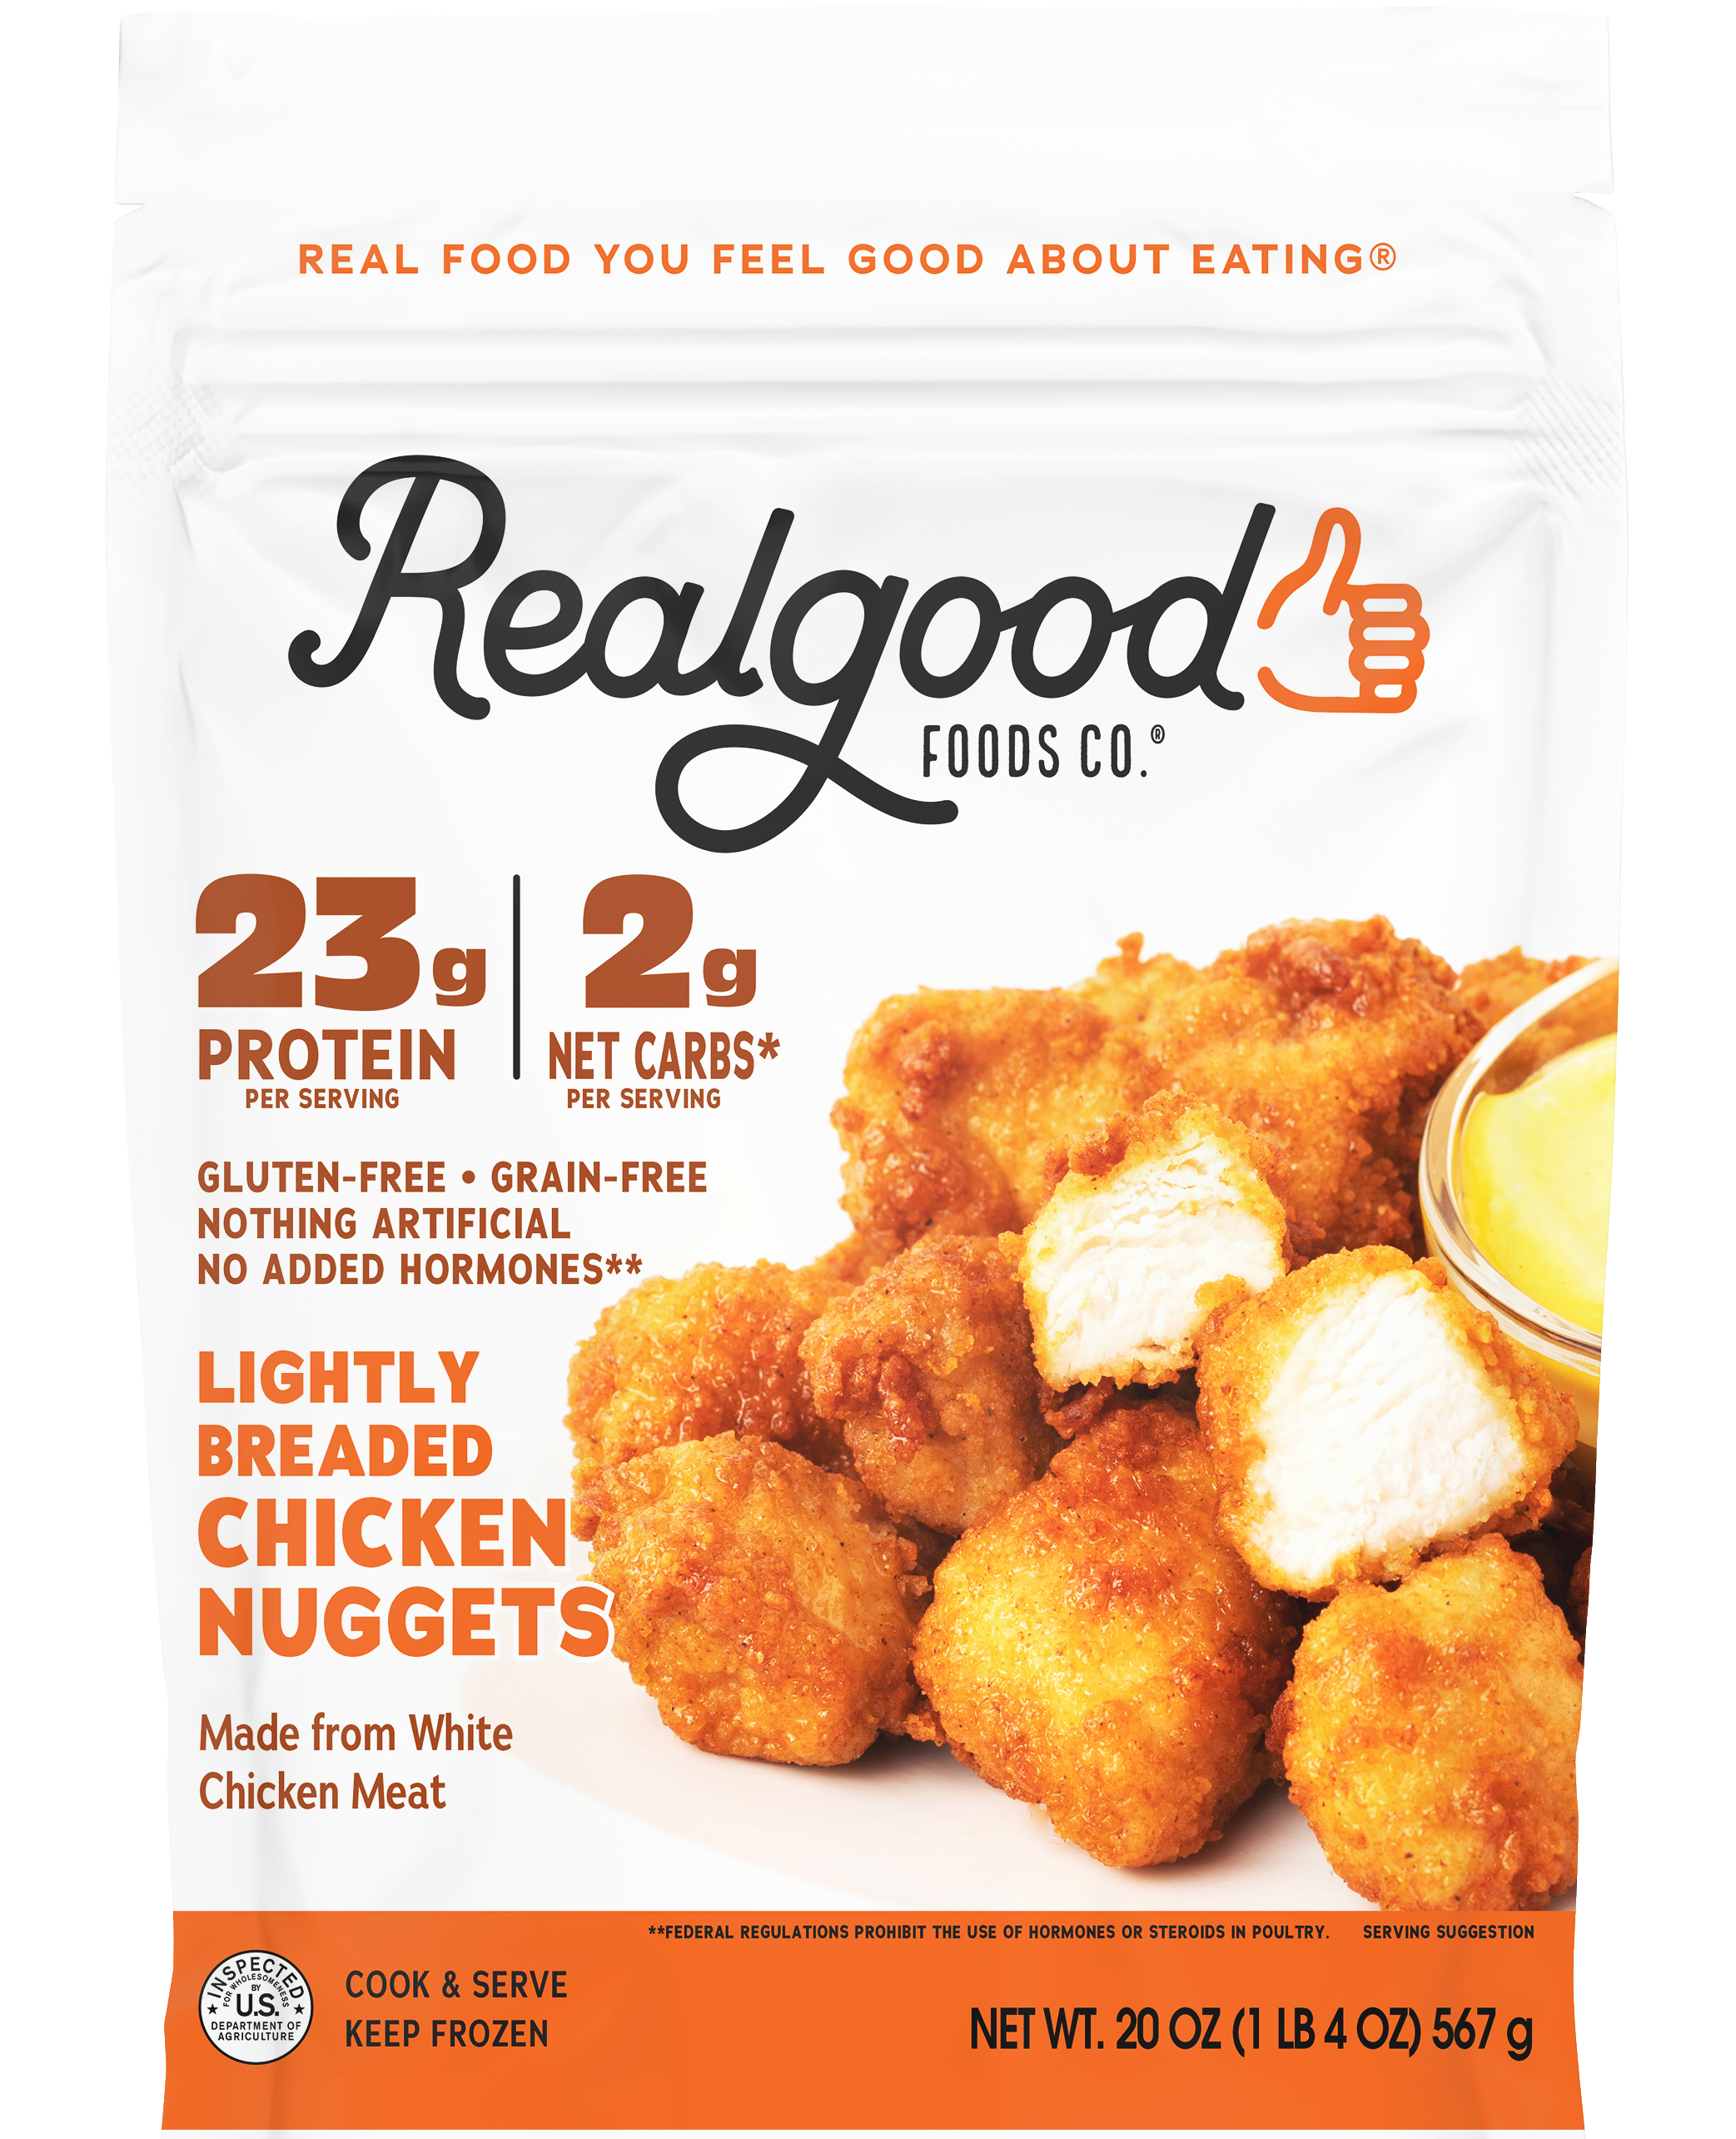 Lightly Breaded Chicken Breast Original Strips (3lbs) - Just Bare Foods